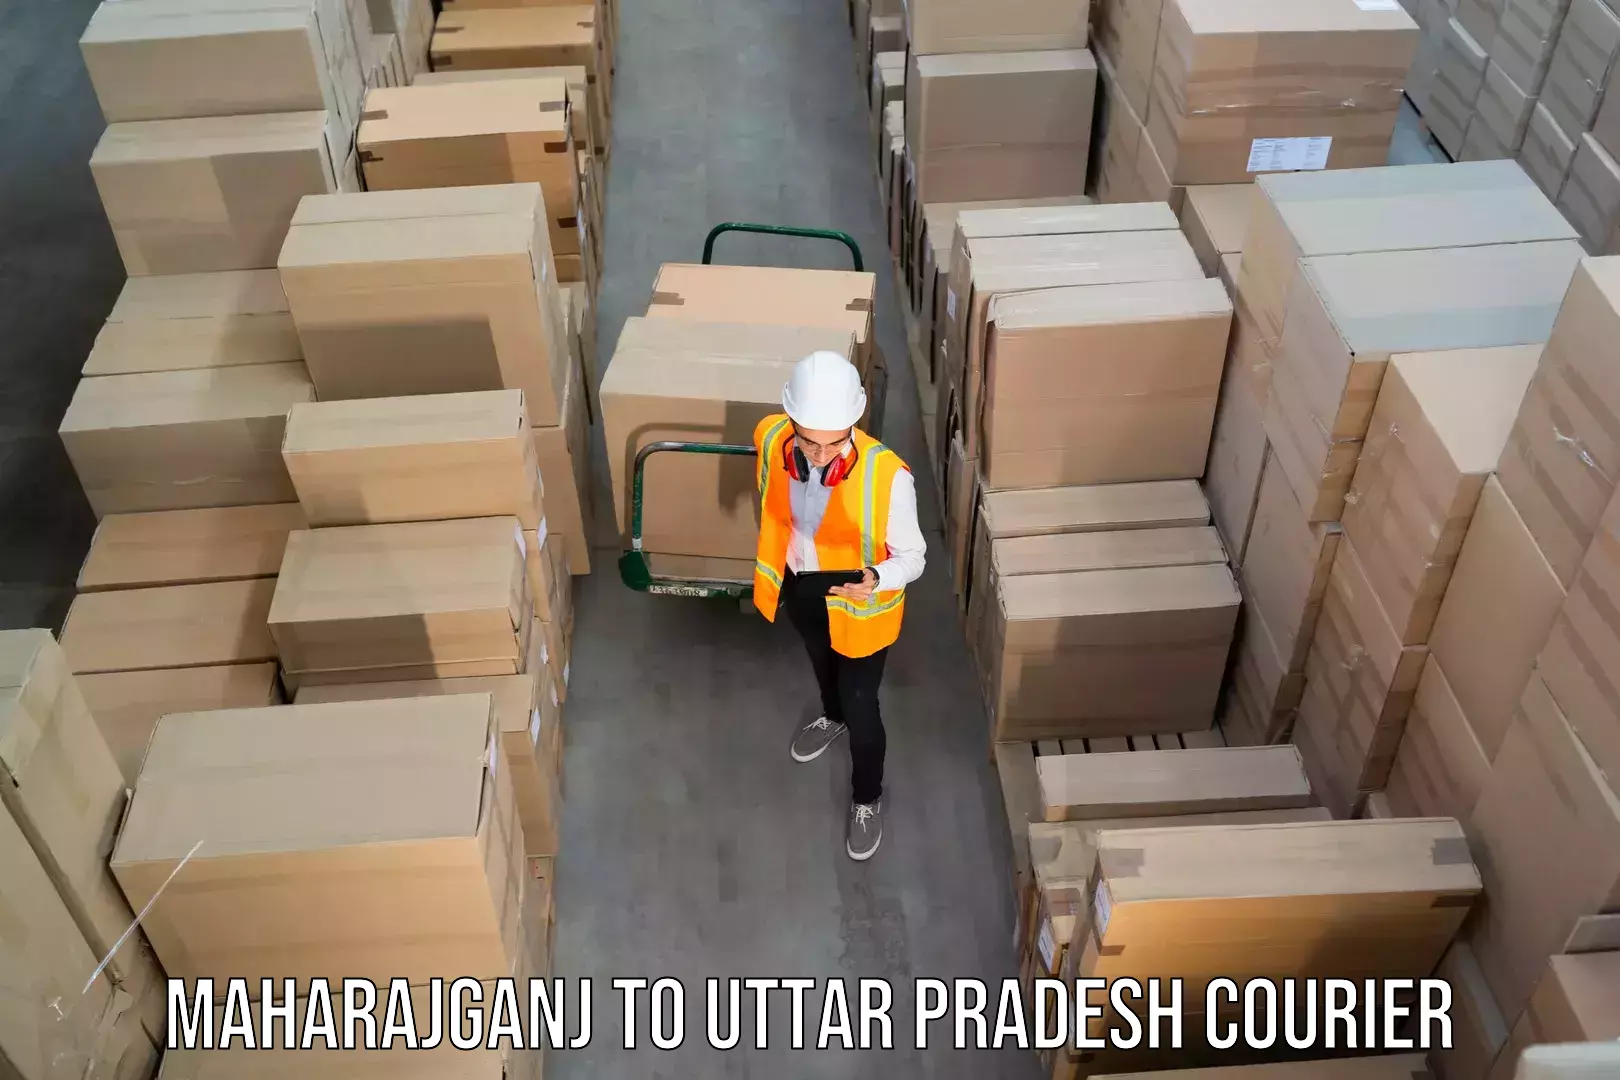 State-of-the-art courier technology Maharajganj to Aligarh Muslim University